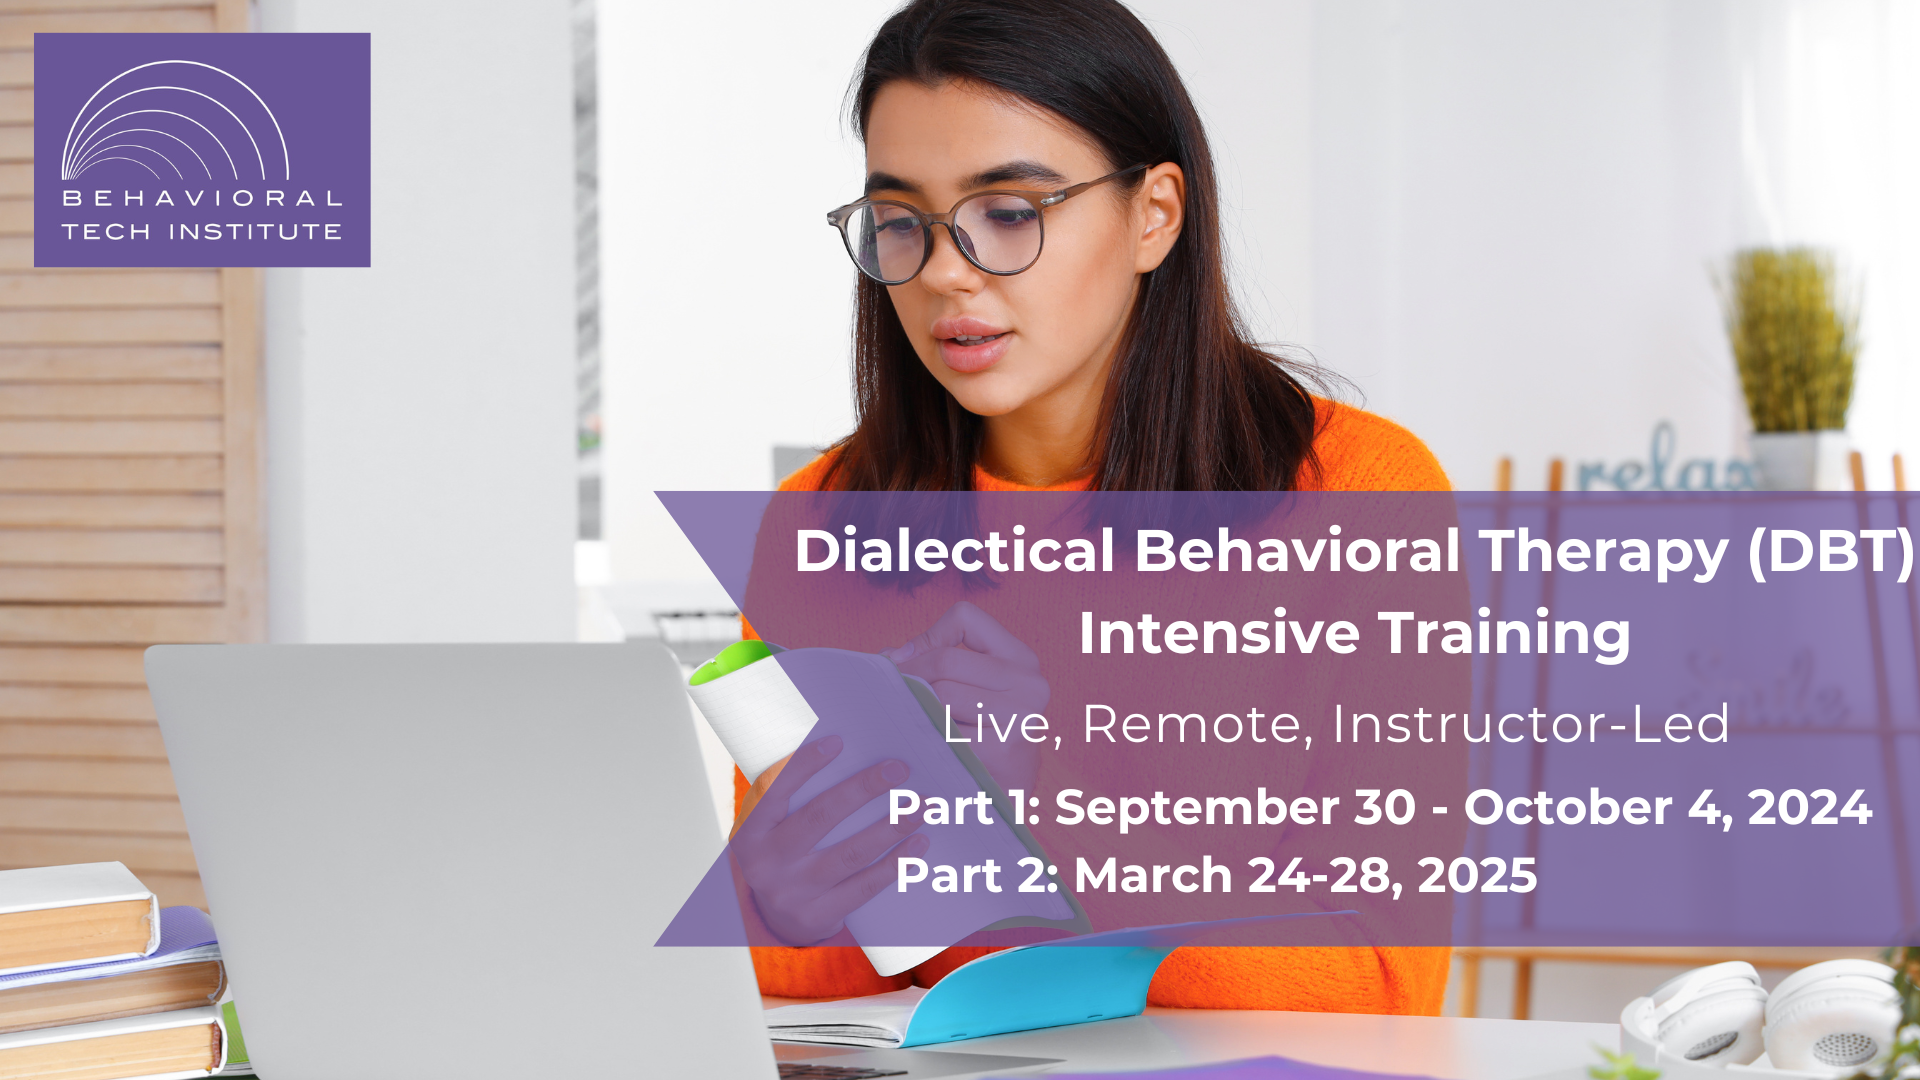 DBT Intensive Training - Two Part, Live, Remote, Instructor Led